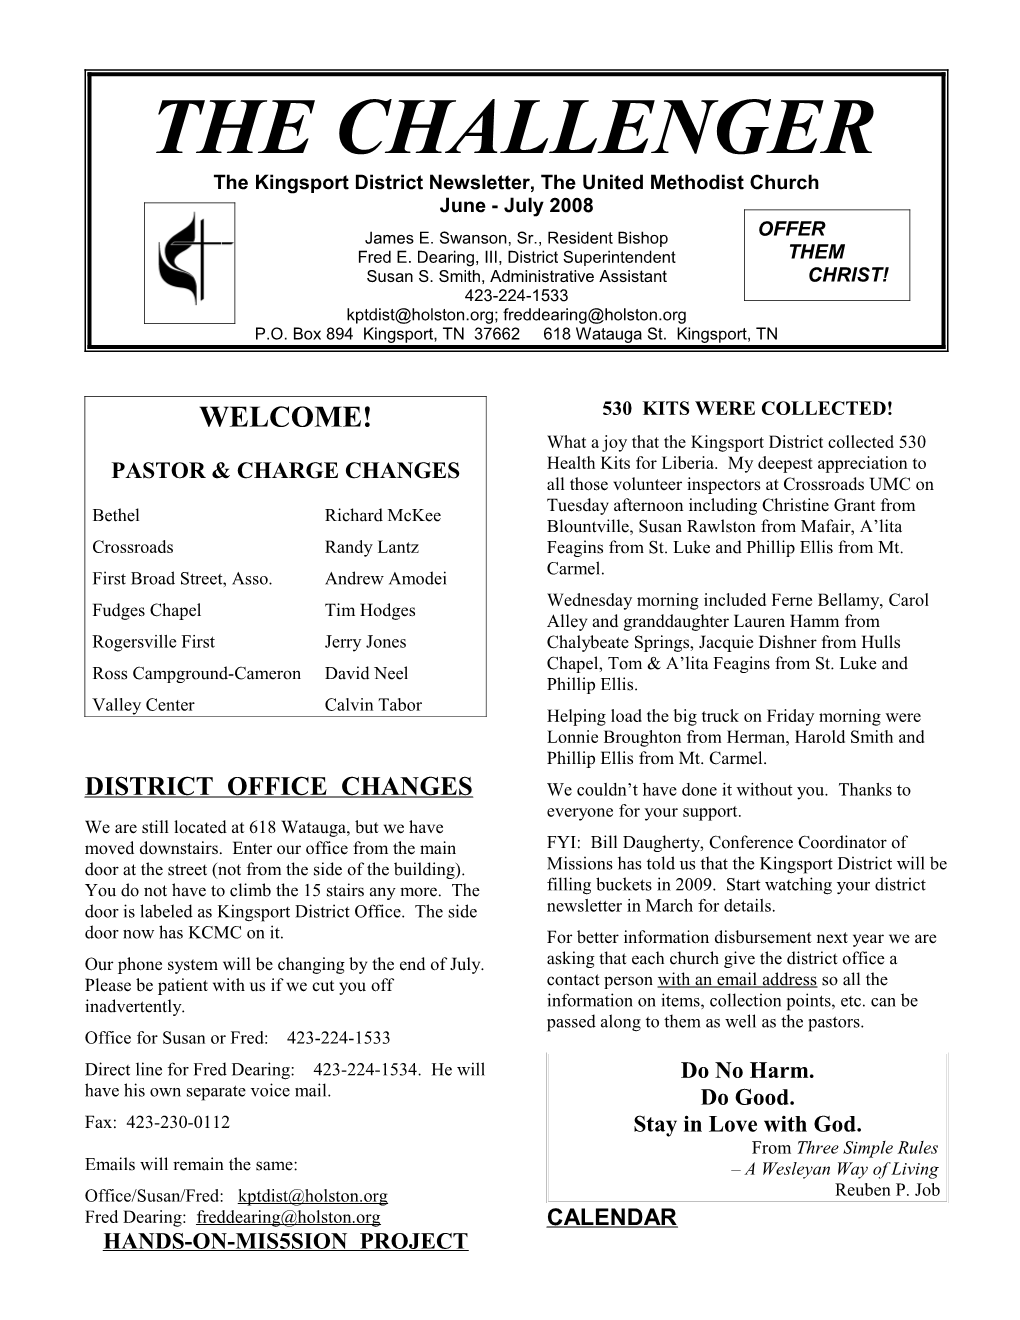 The Kingsport District Newsletter, the United Methodist Church